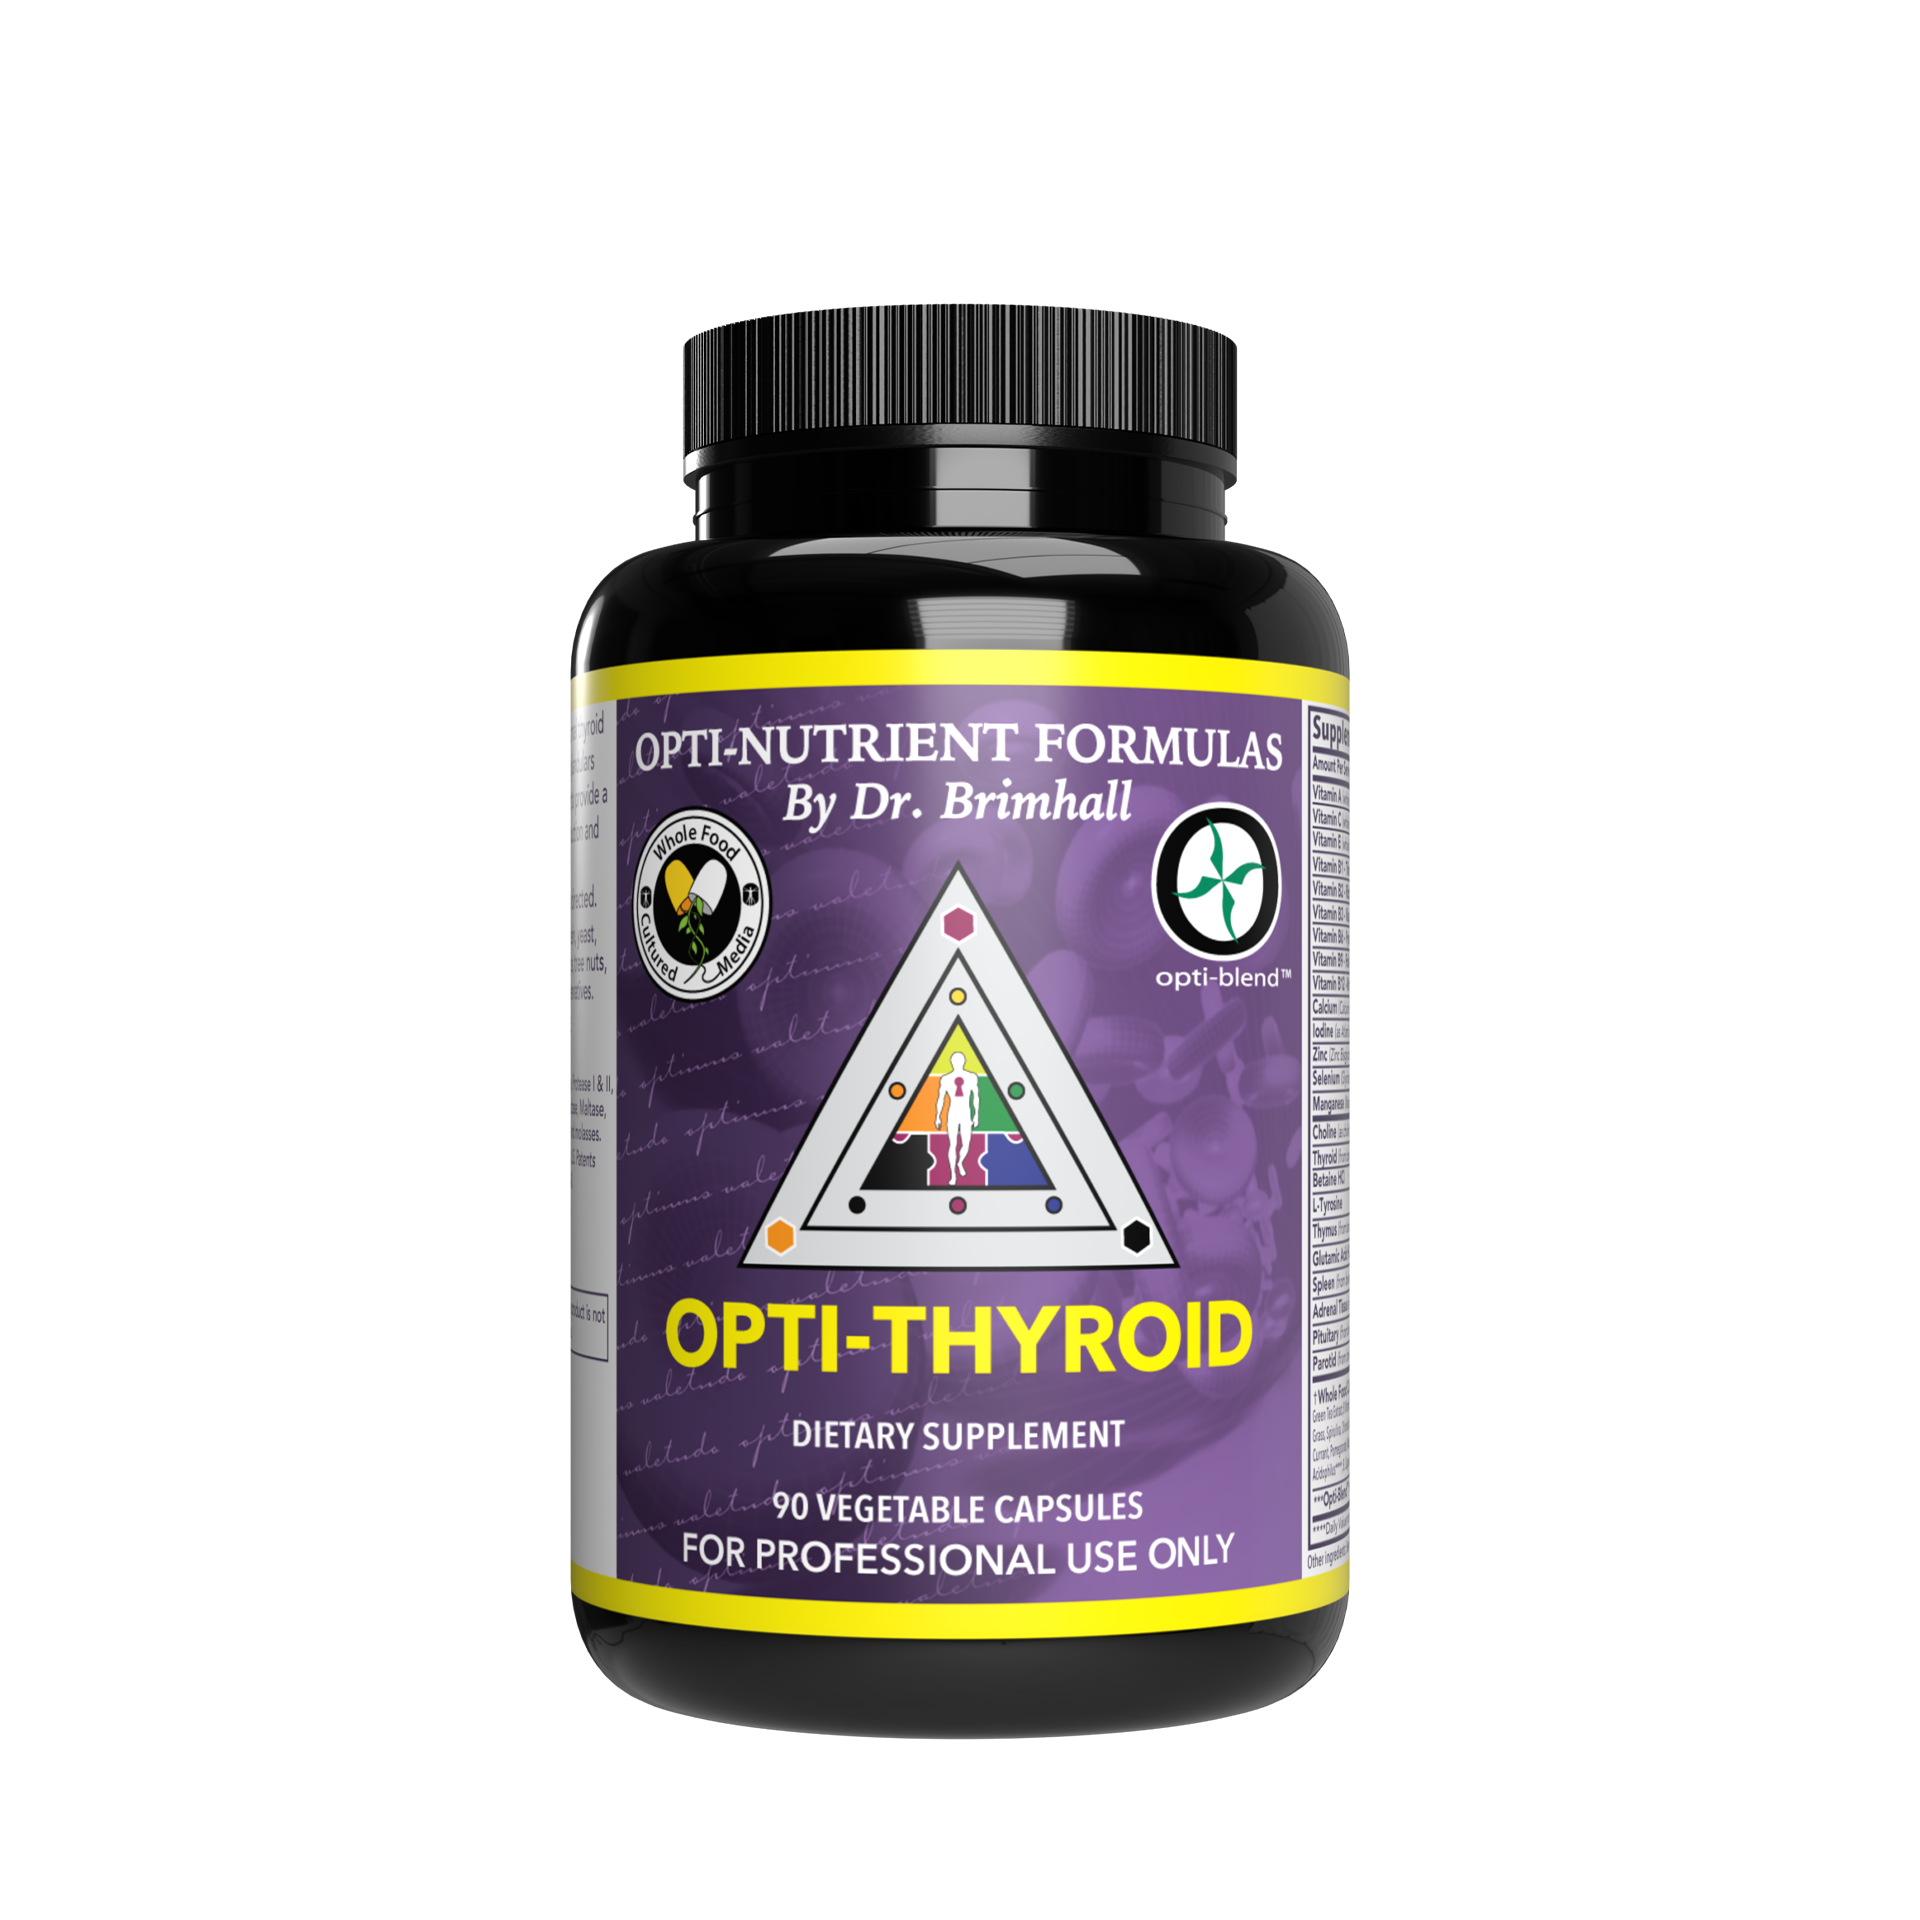 Image of a bottle of Opti-Nutrients Opti-Thyroid.